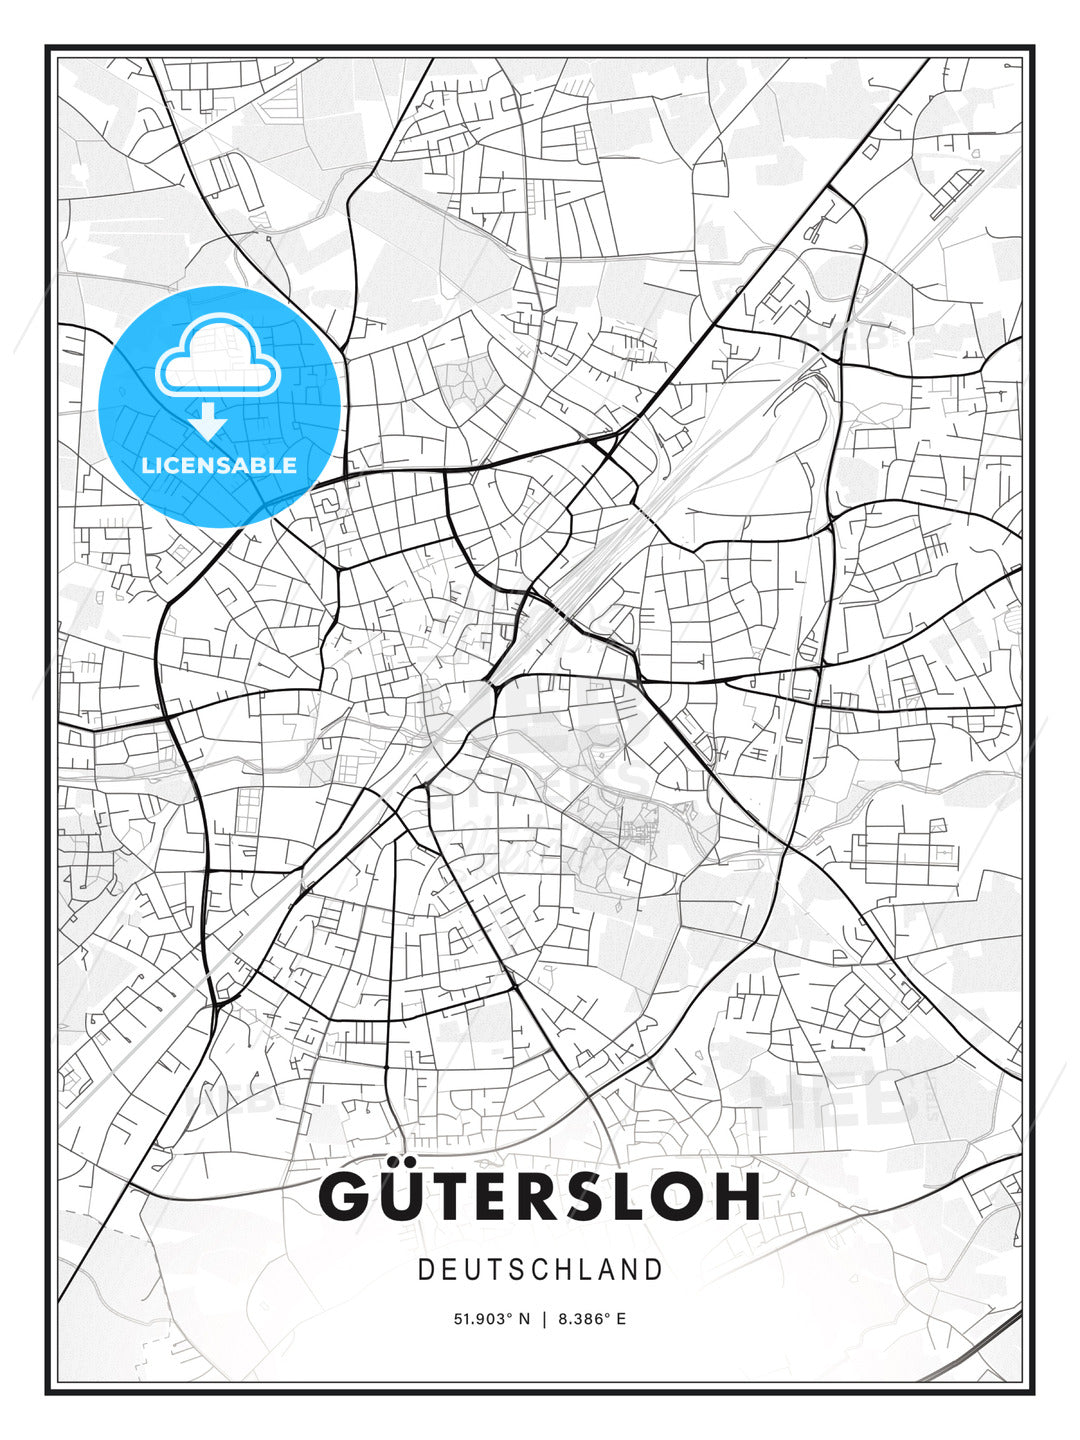 GÜTERSLOH / Gutersloh, Germany, Modern Print Template in Various Formats - HEBSTREITS Sketches